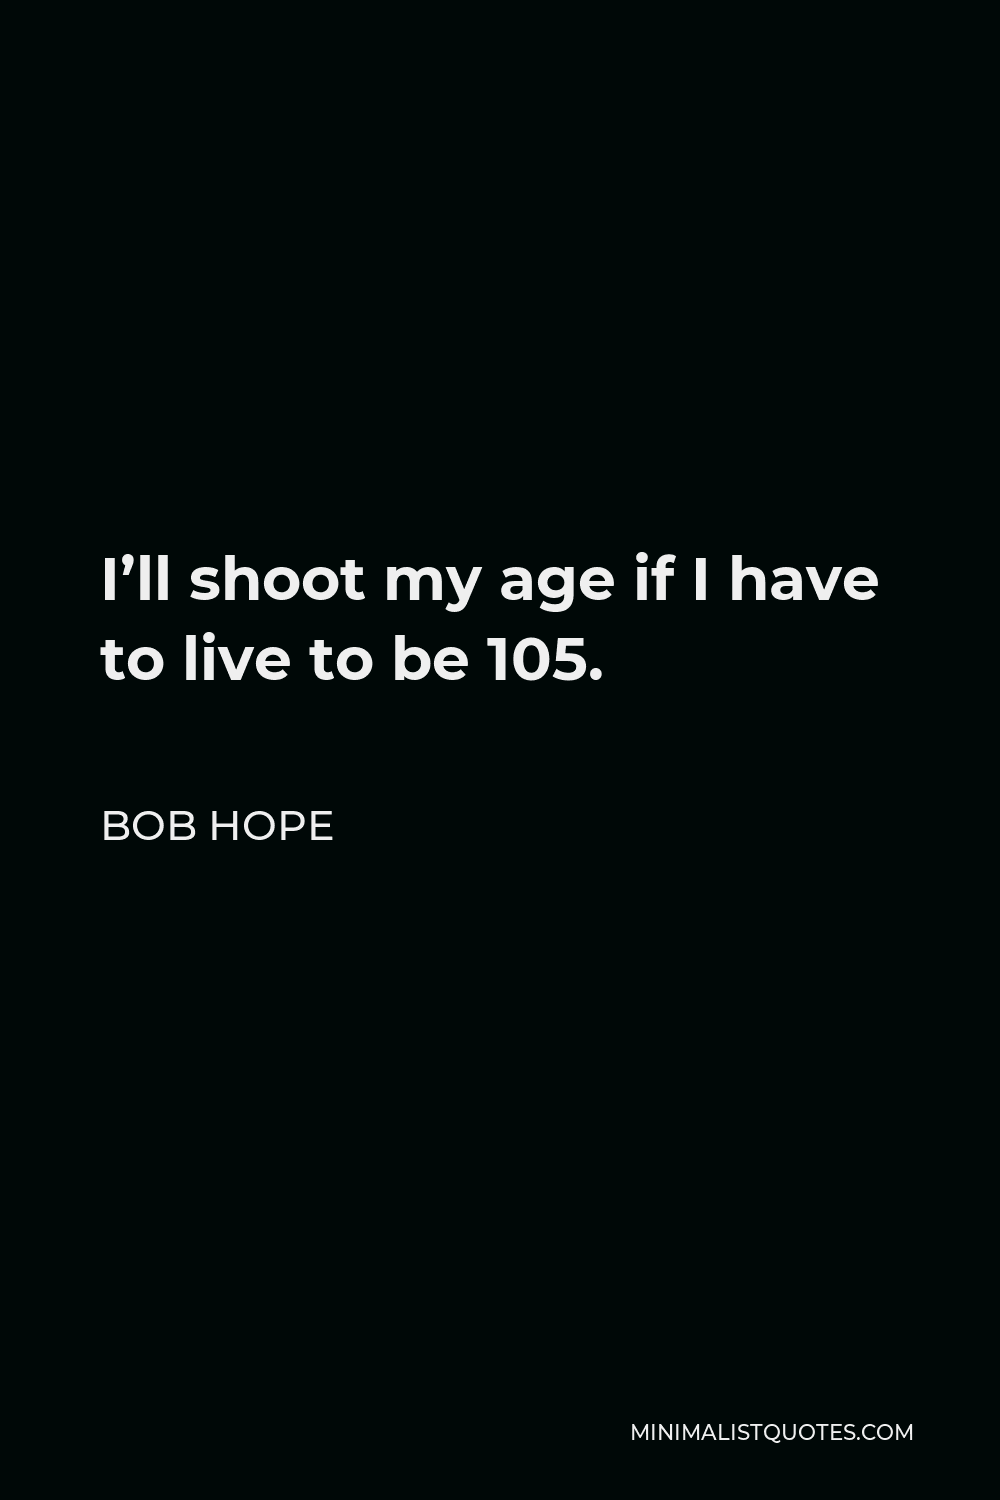 Bob Hope Quote - I’ll shoot my age if I have to live to be 105.